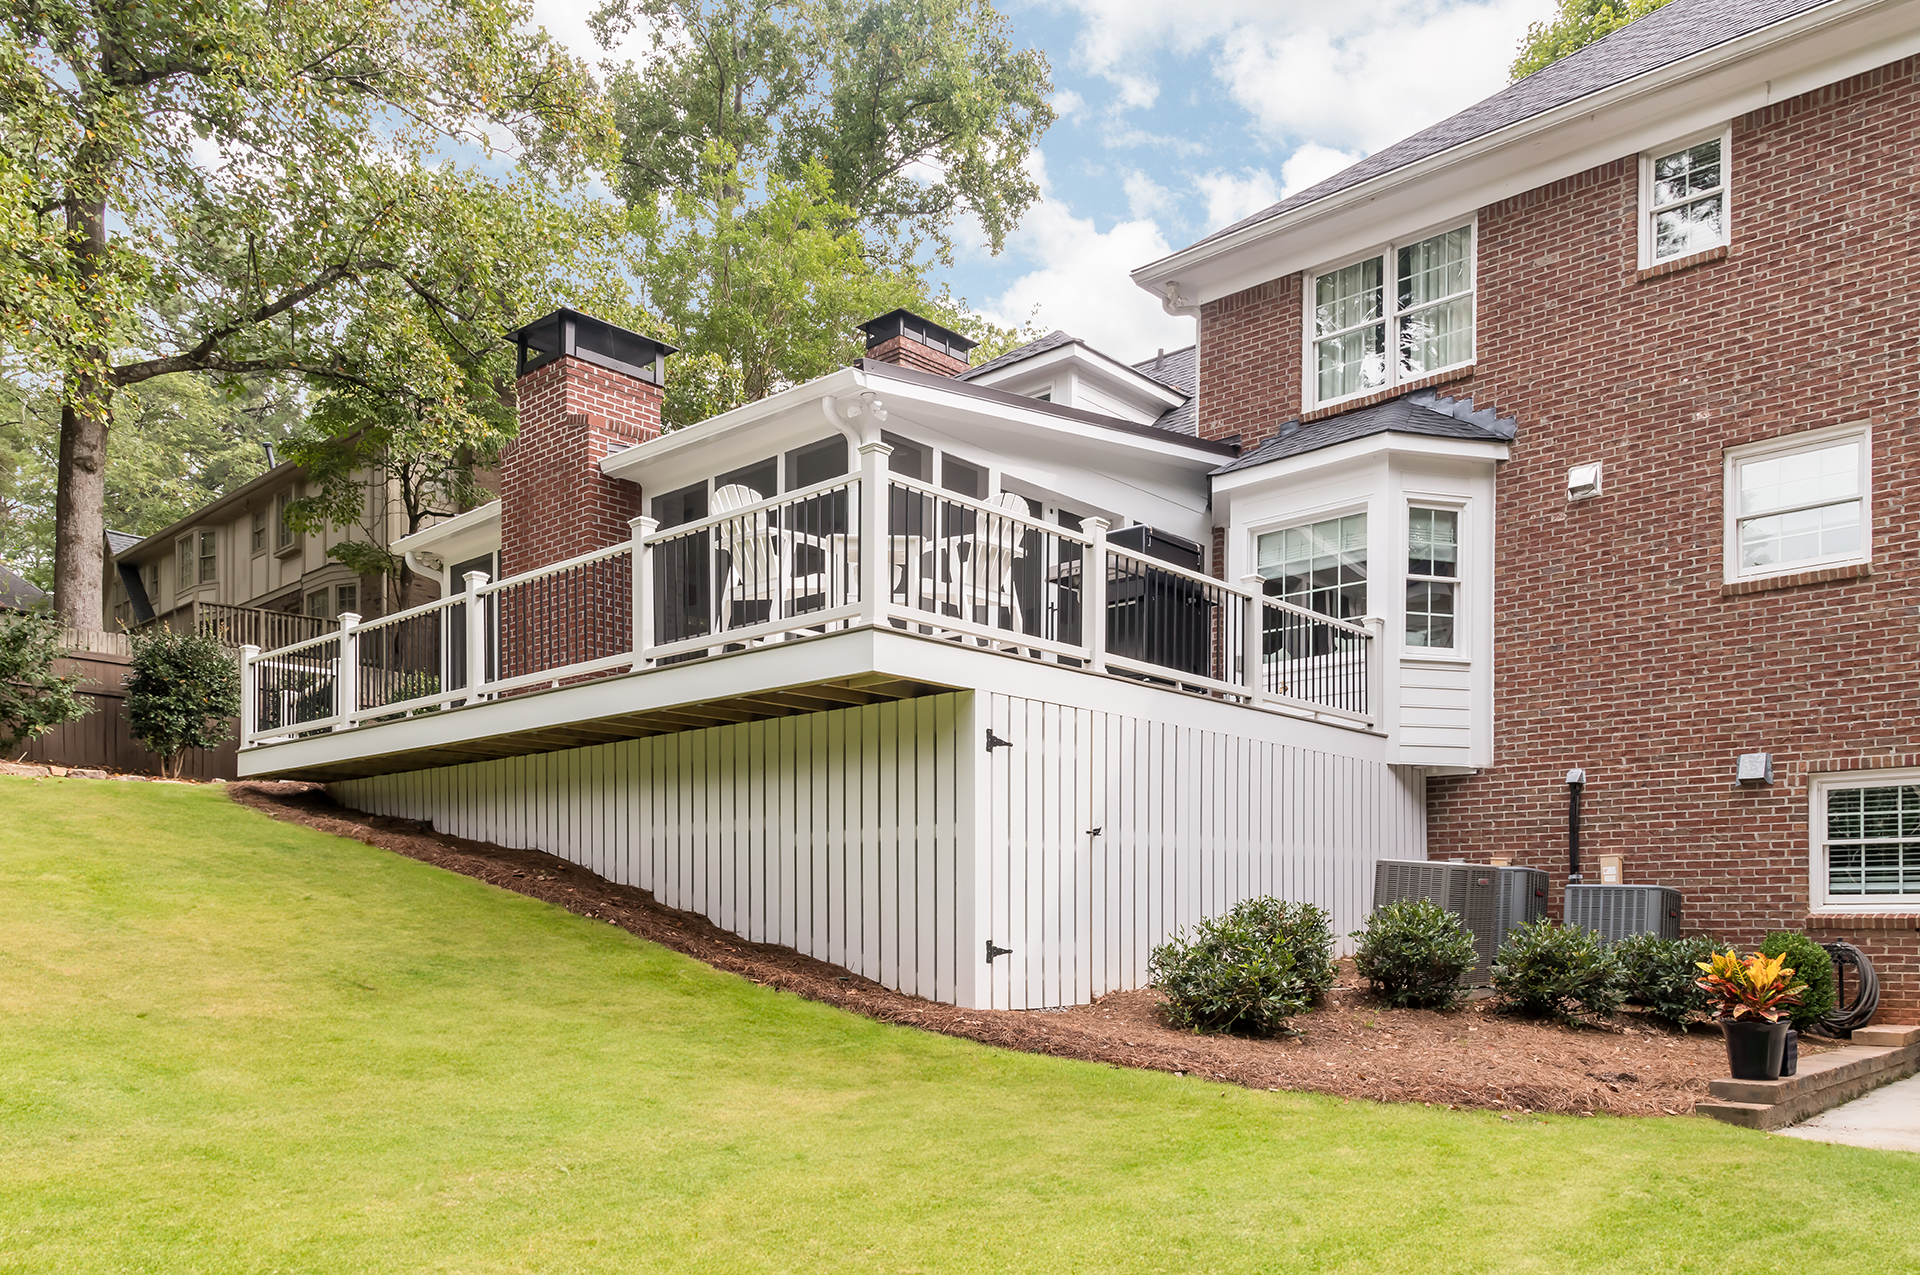 Exterior of home with a screened porch and deck